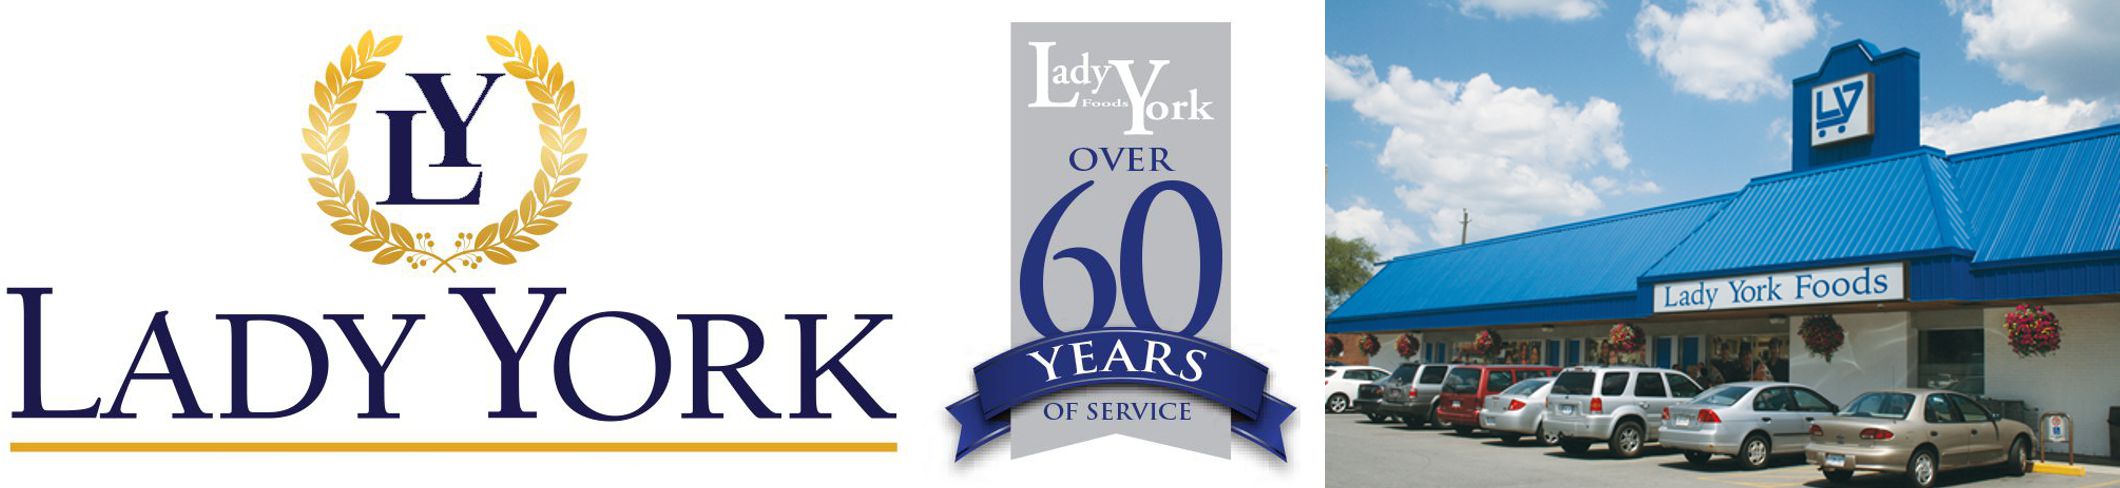 Lady York Foods - Over 60 Years Logo